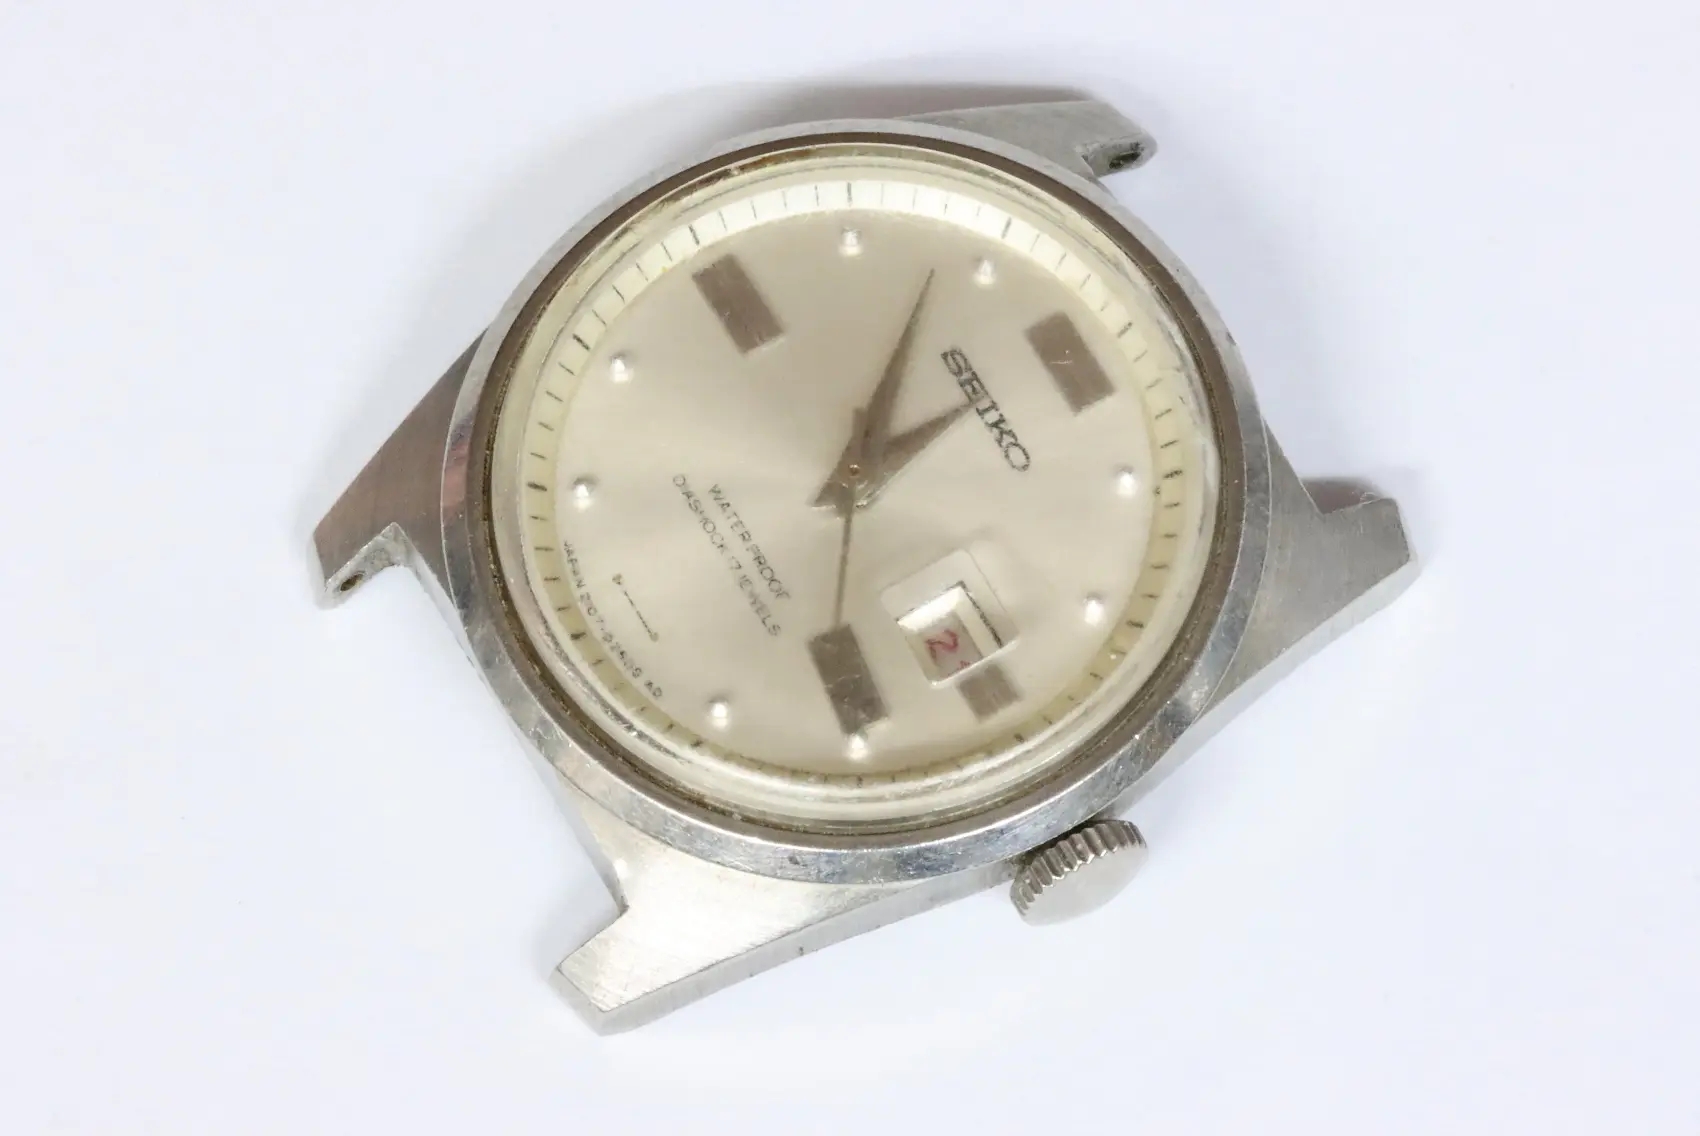 Seiko 2107-0081 small size watch with loose indicator